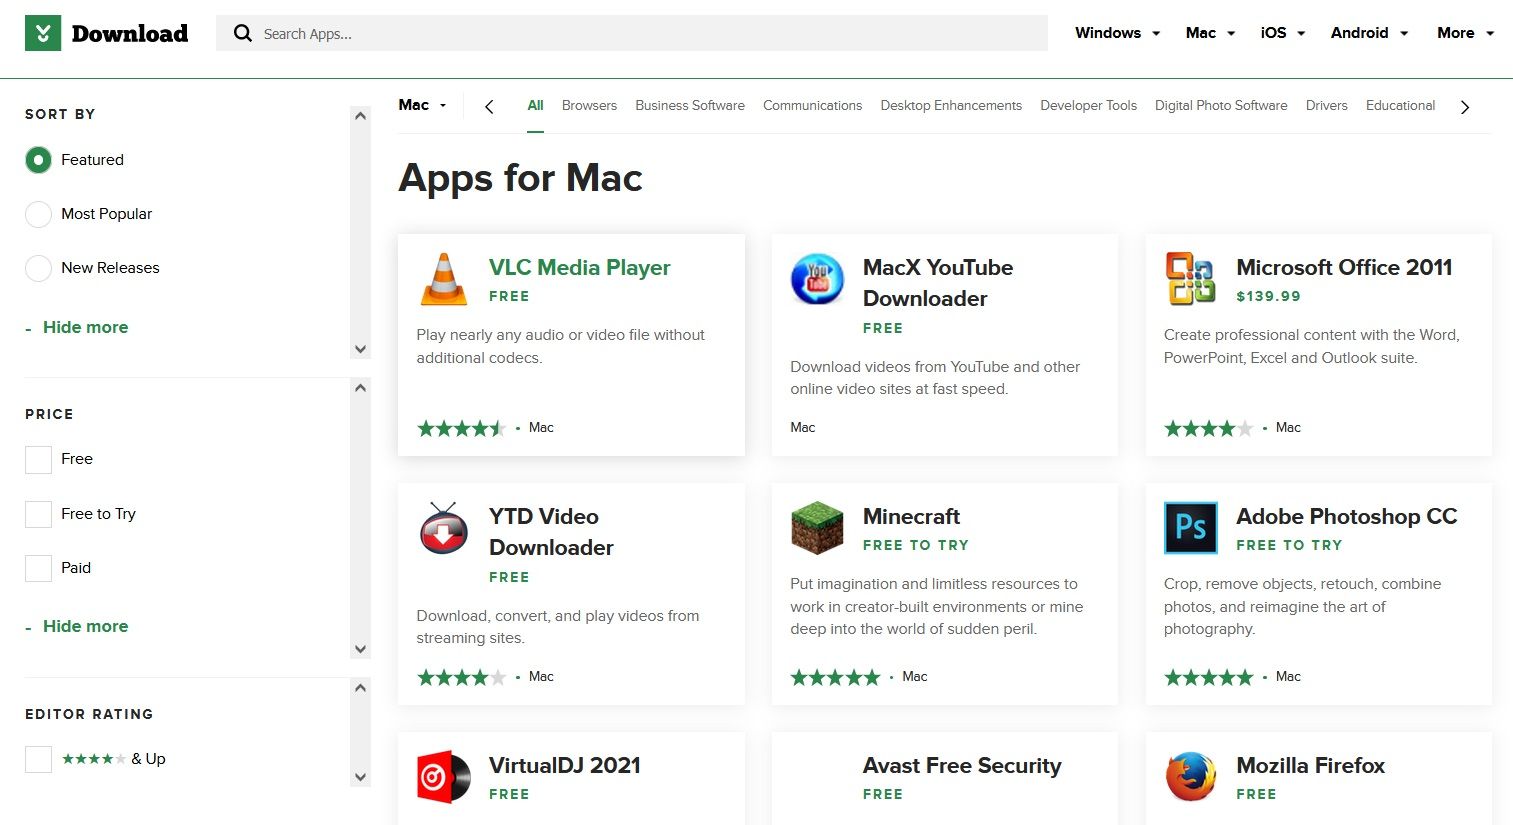 avast for mac review cnet